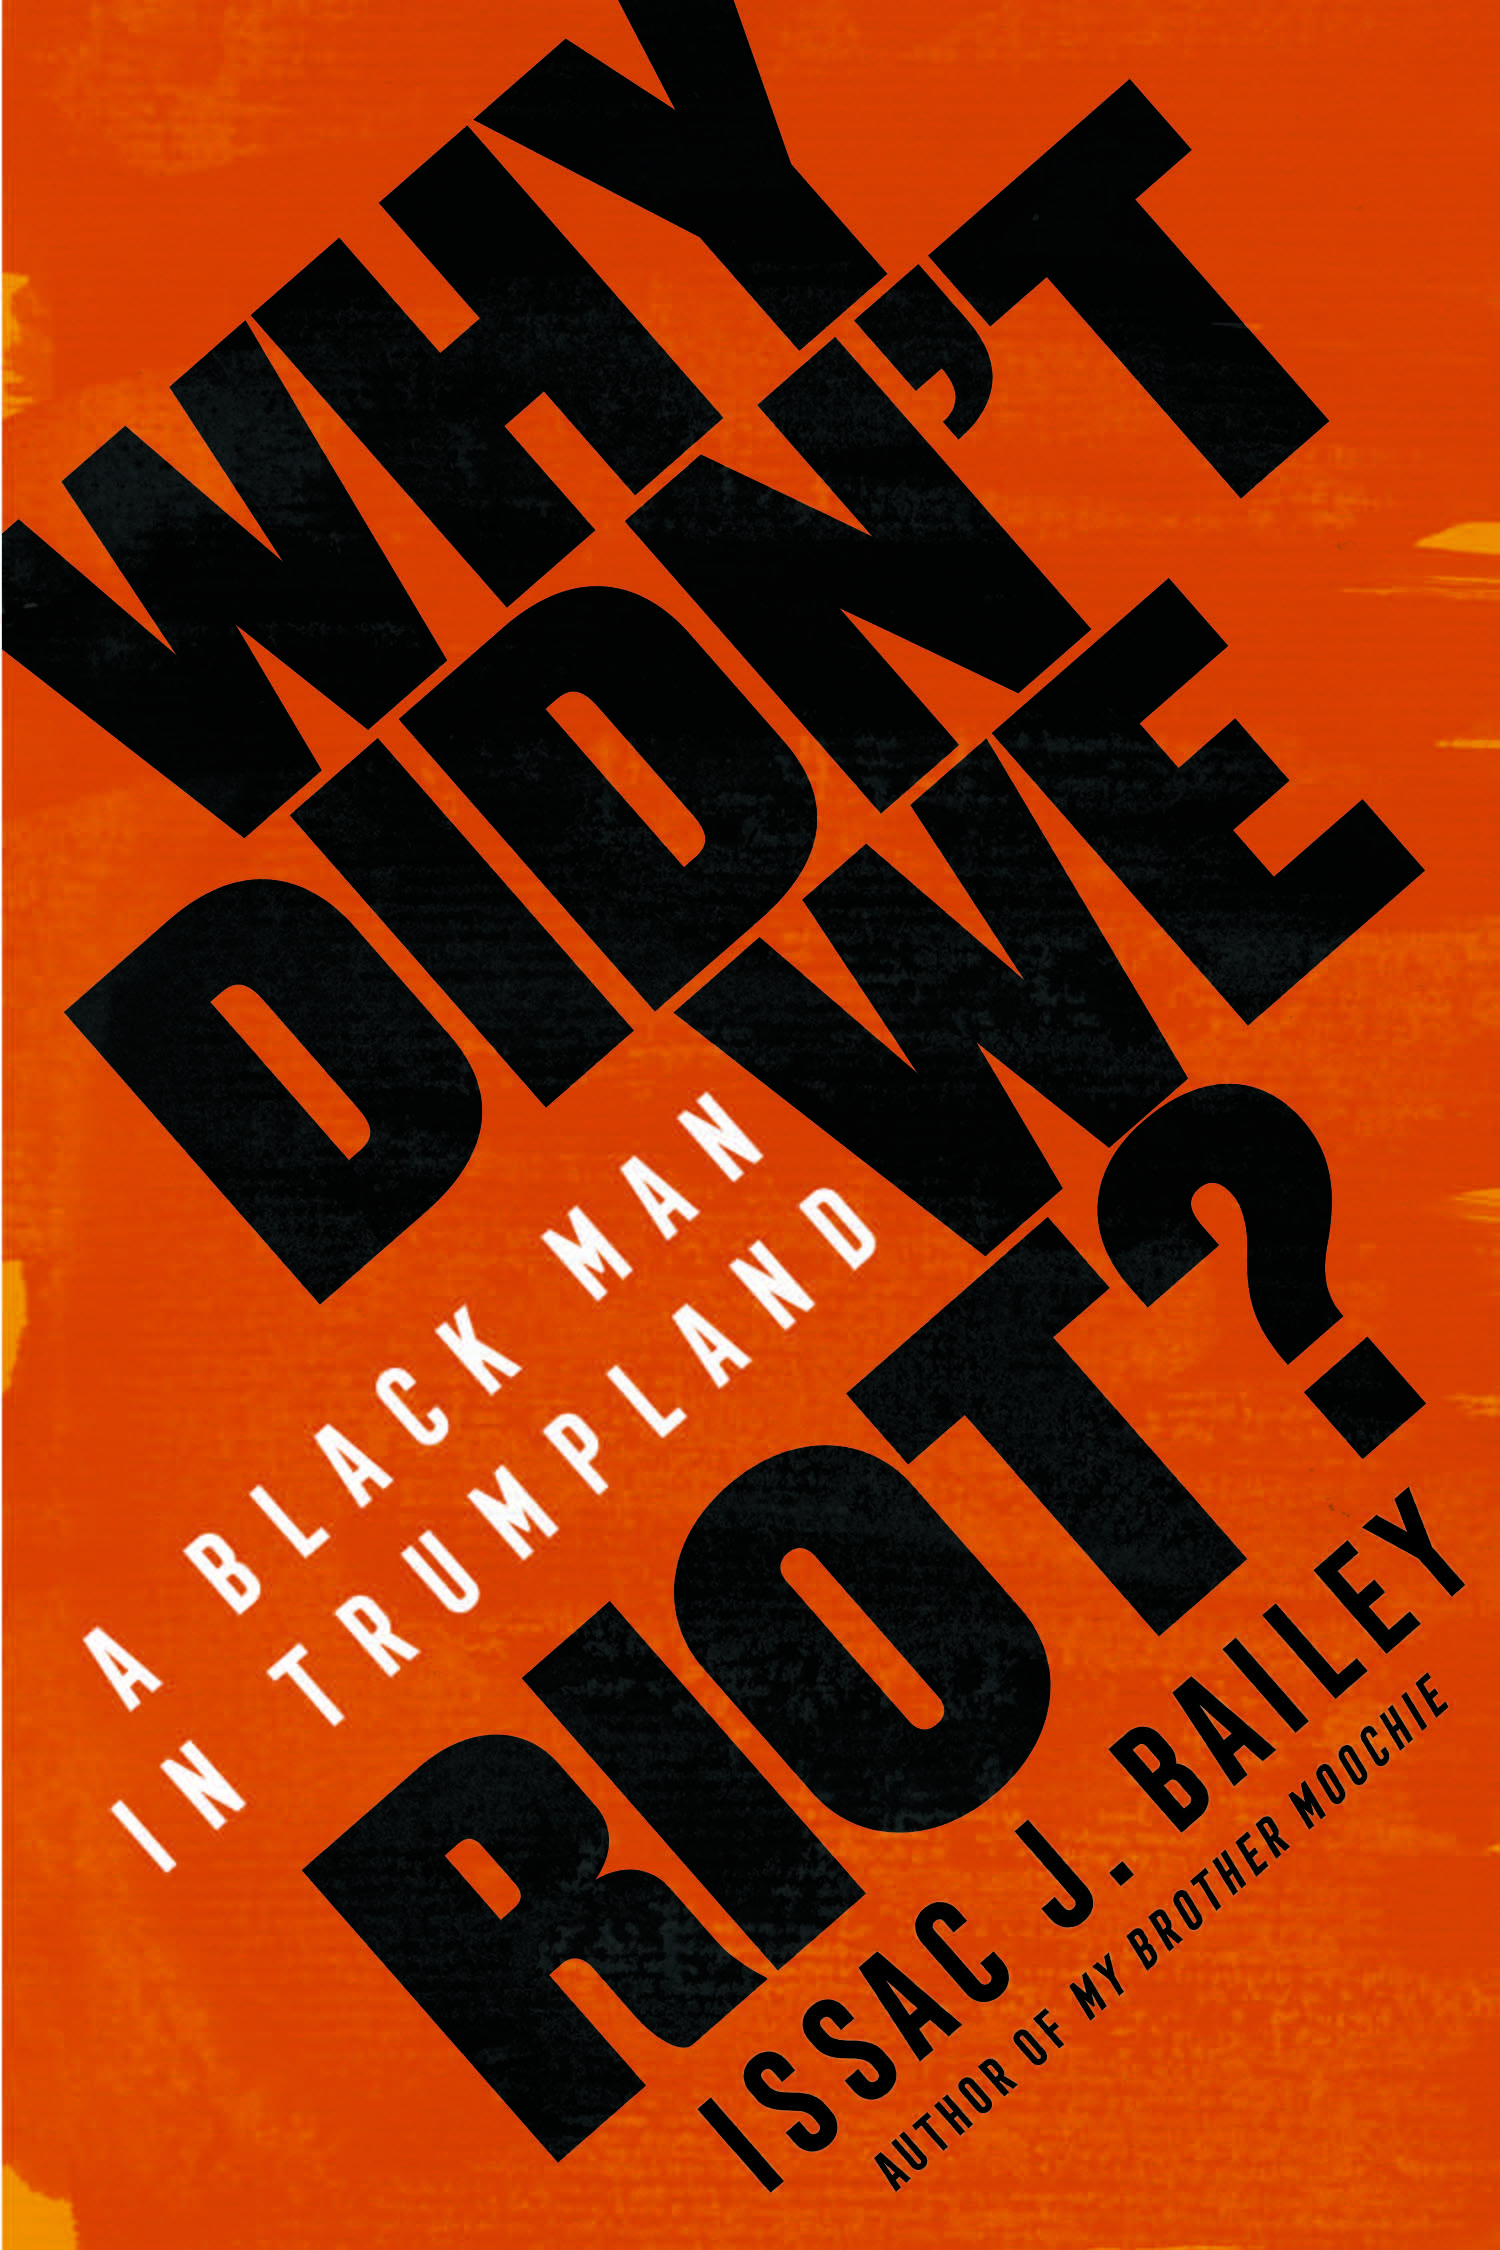 Why Didn't We Riot book cover